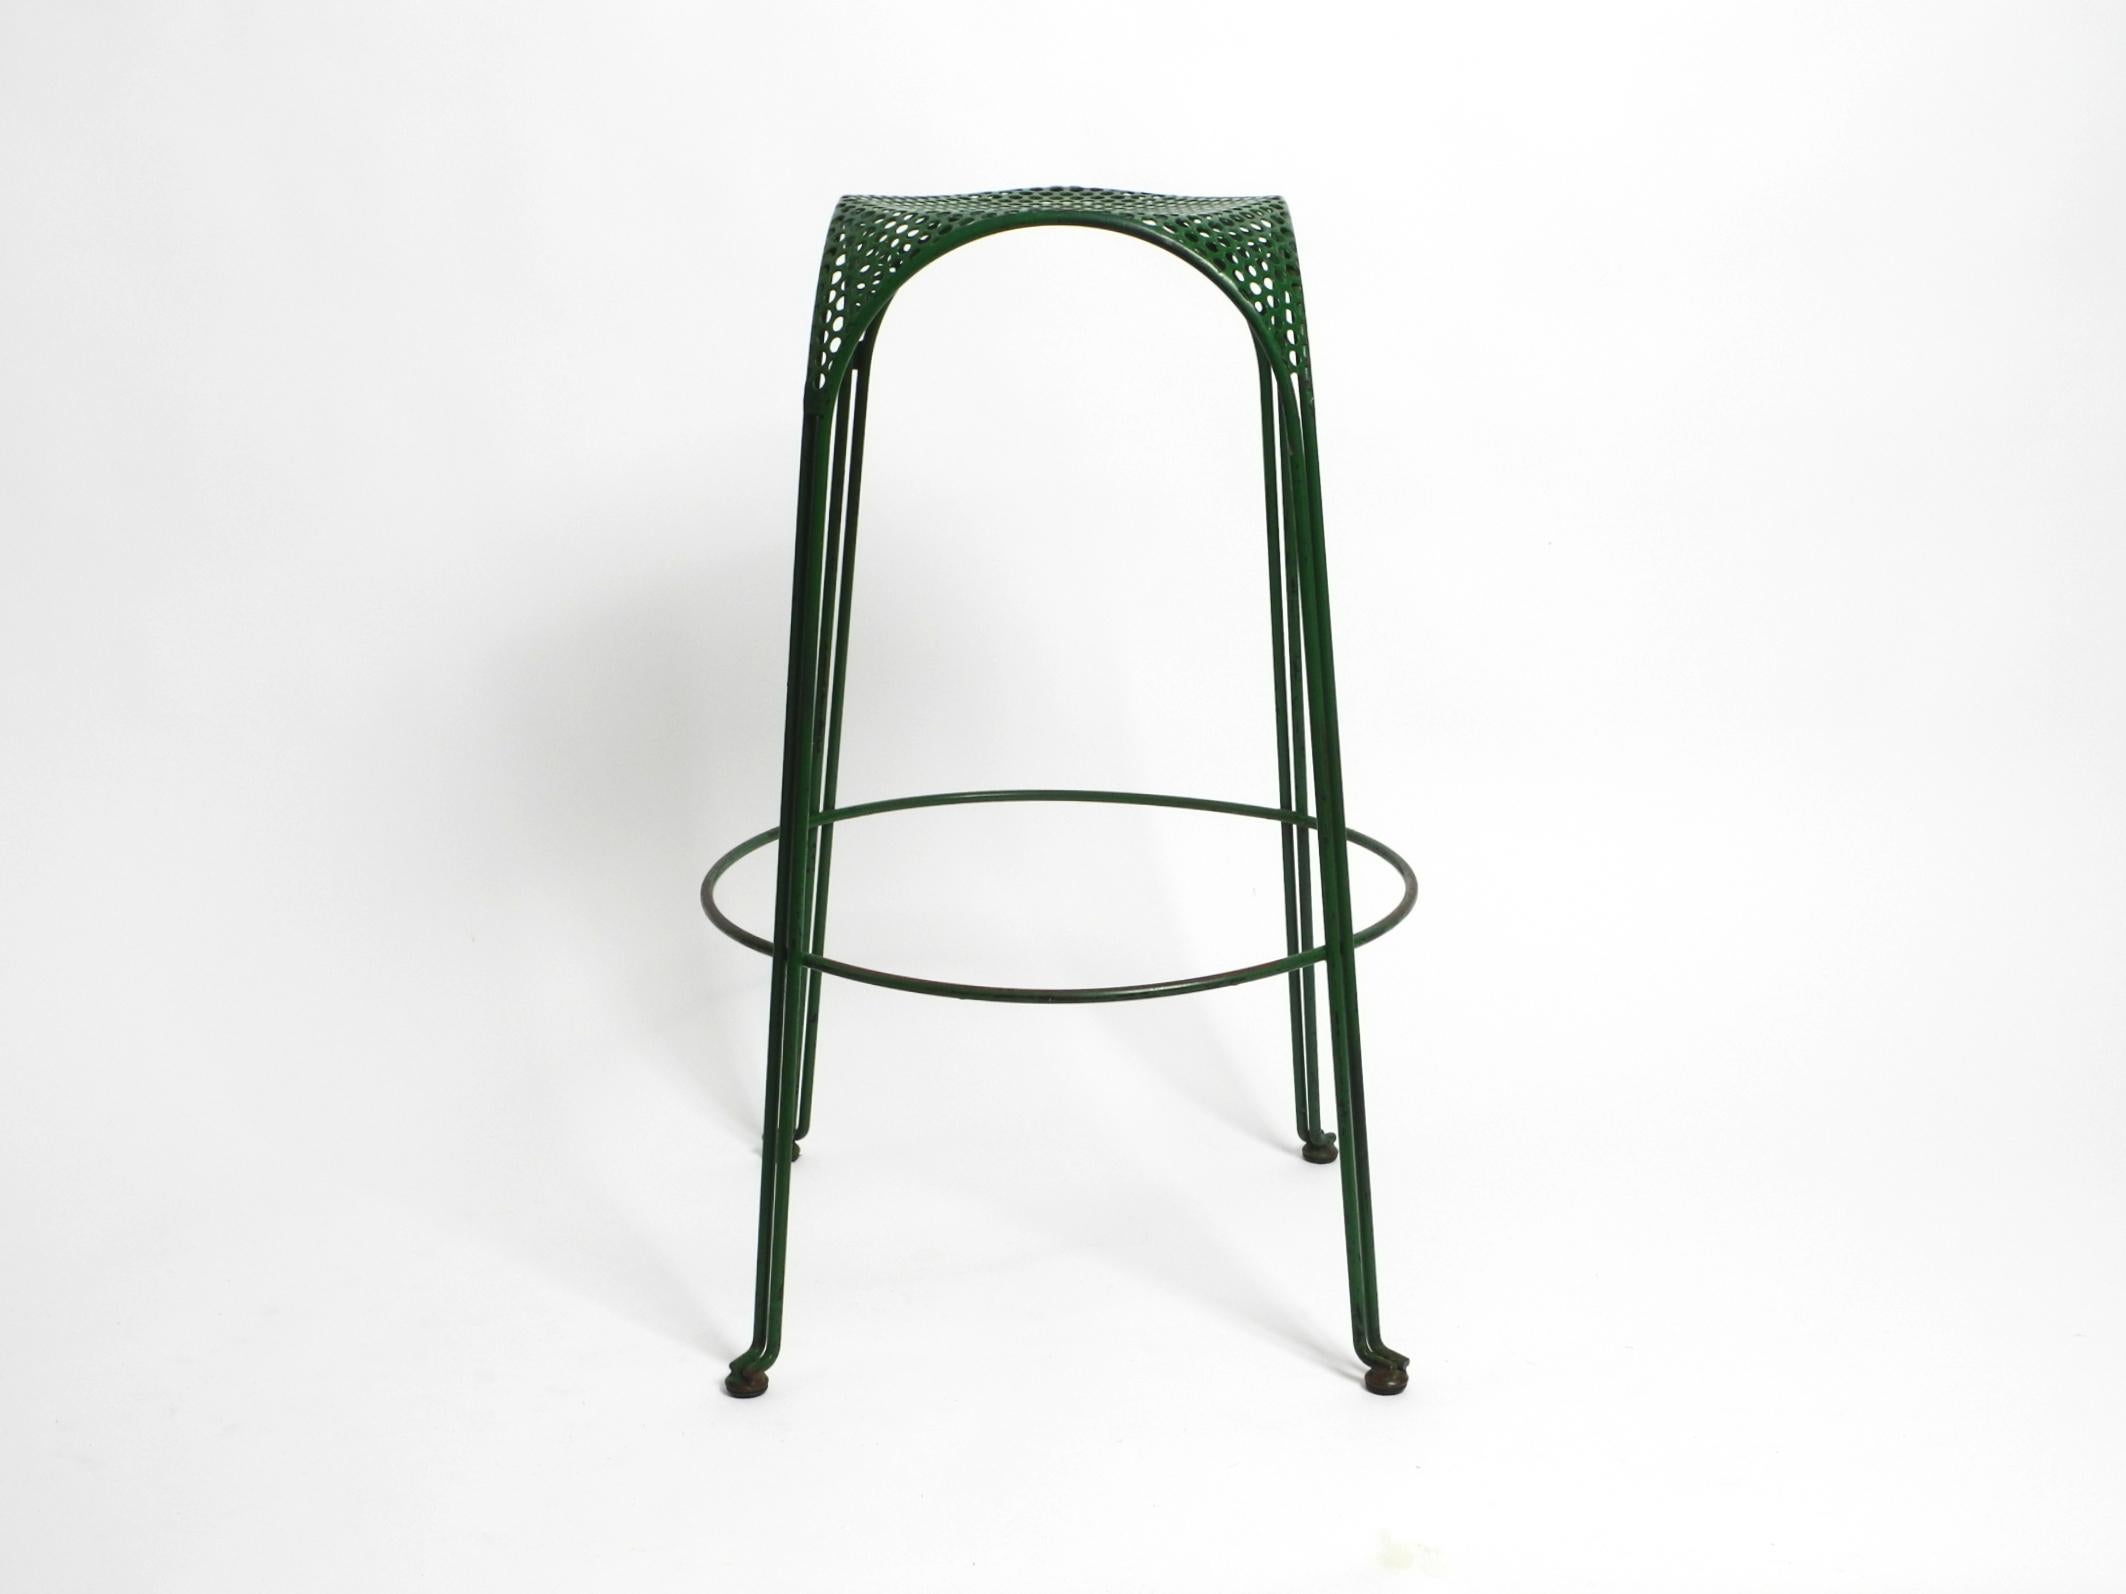 Space Age Italian 1960s bar stool made of green painted metal with perforated metal seat For Sale